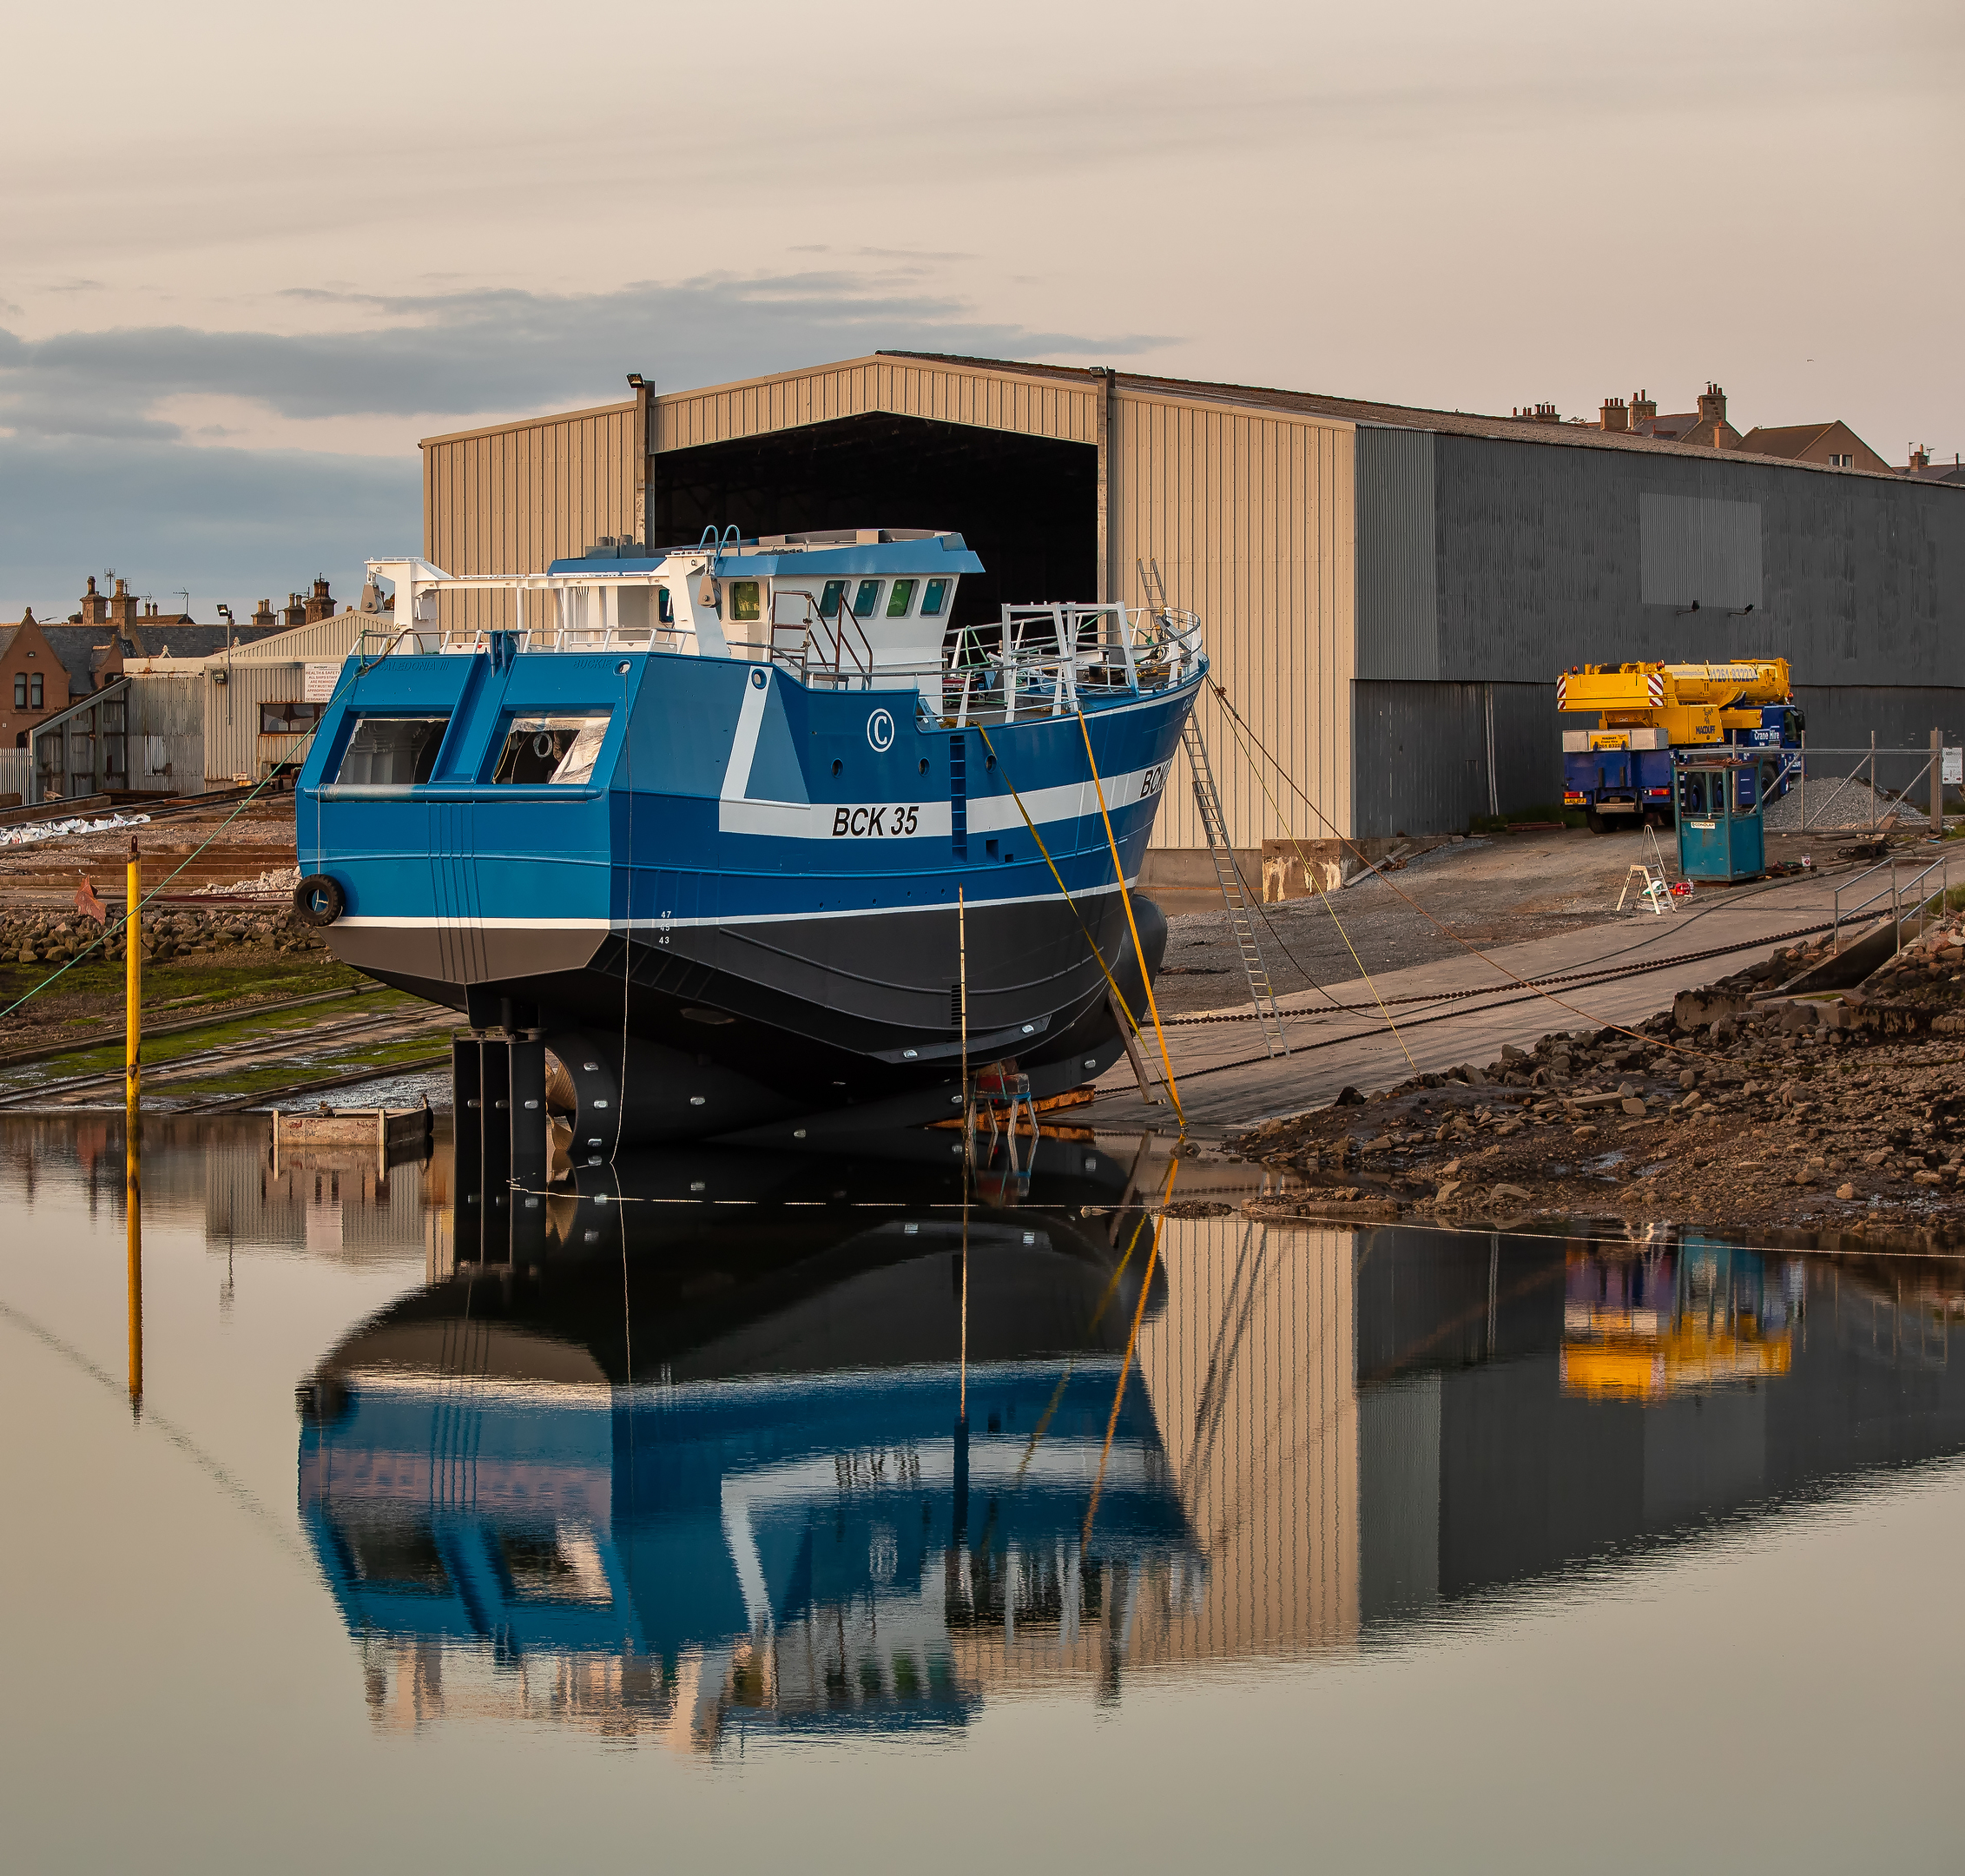 The Macduff Shipyards launch area at Buckie Harbour